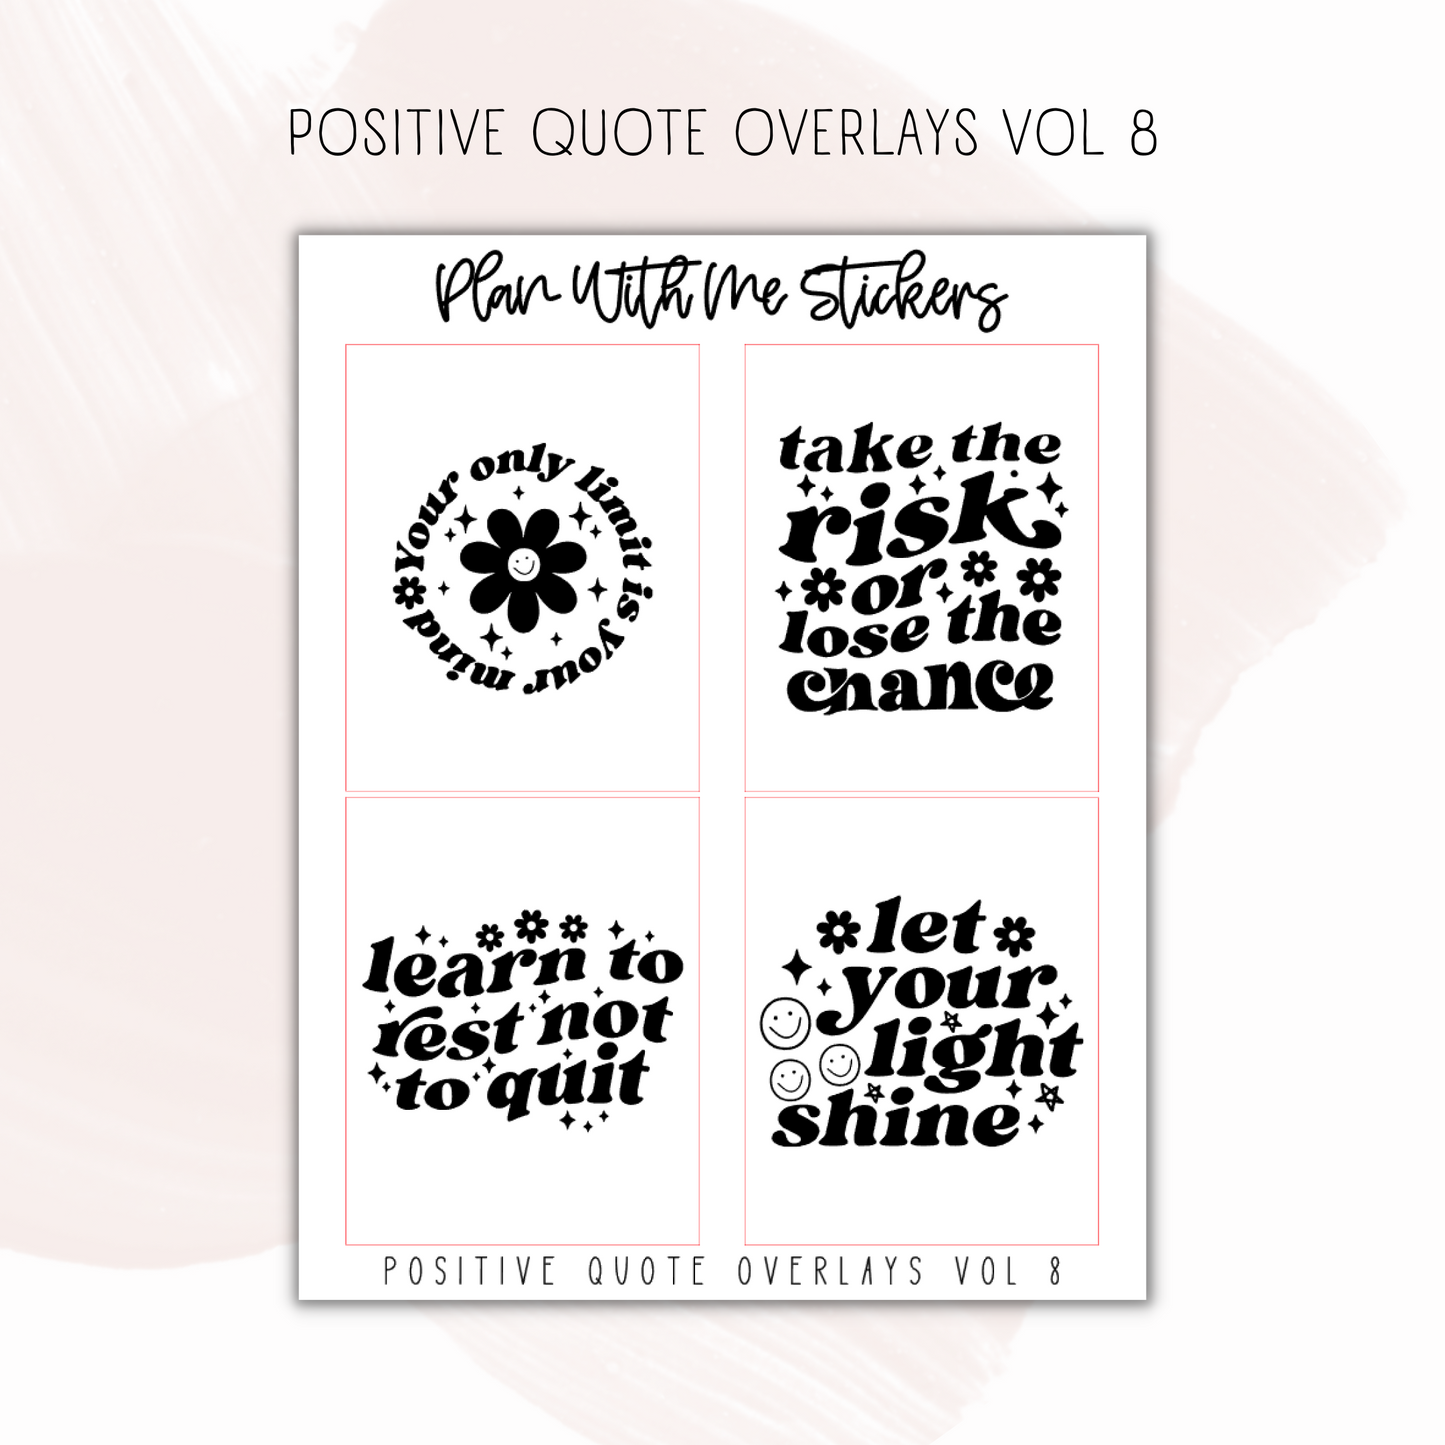 Positive Quote Overlays Vol 8